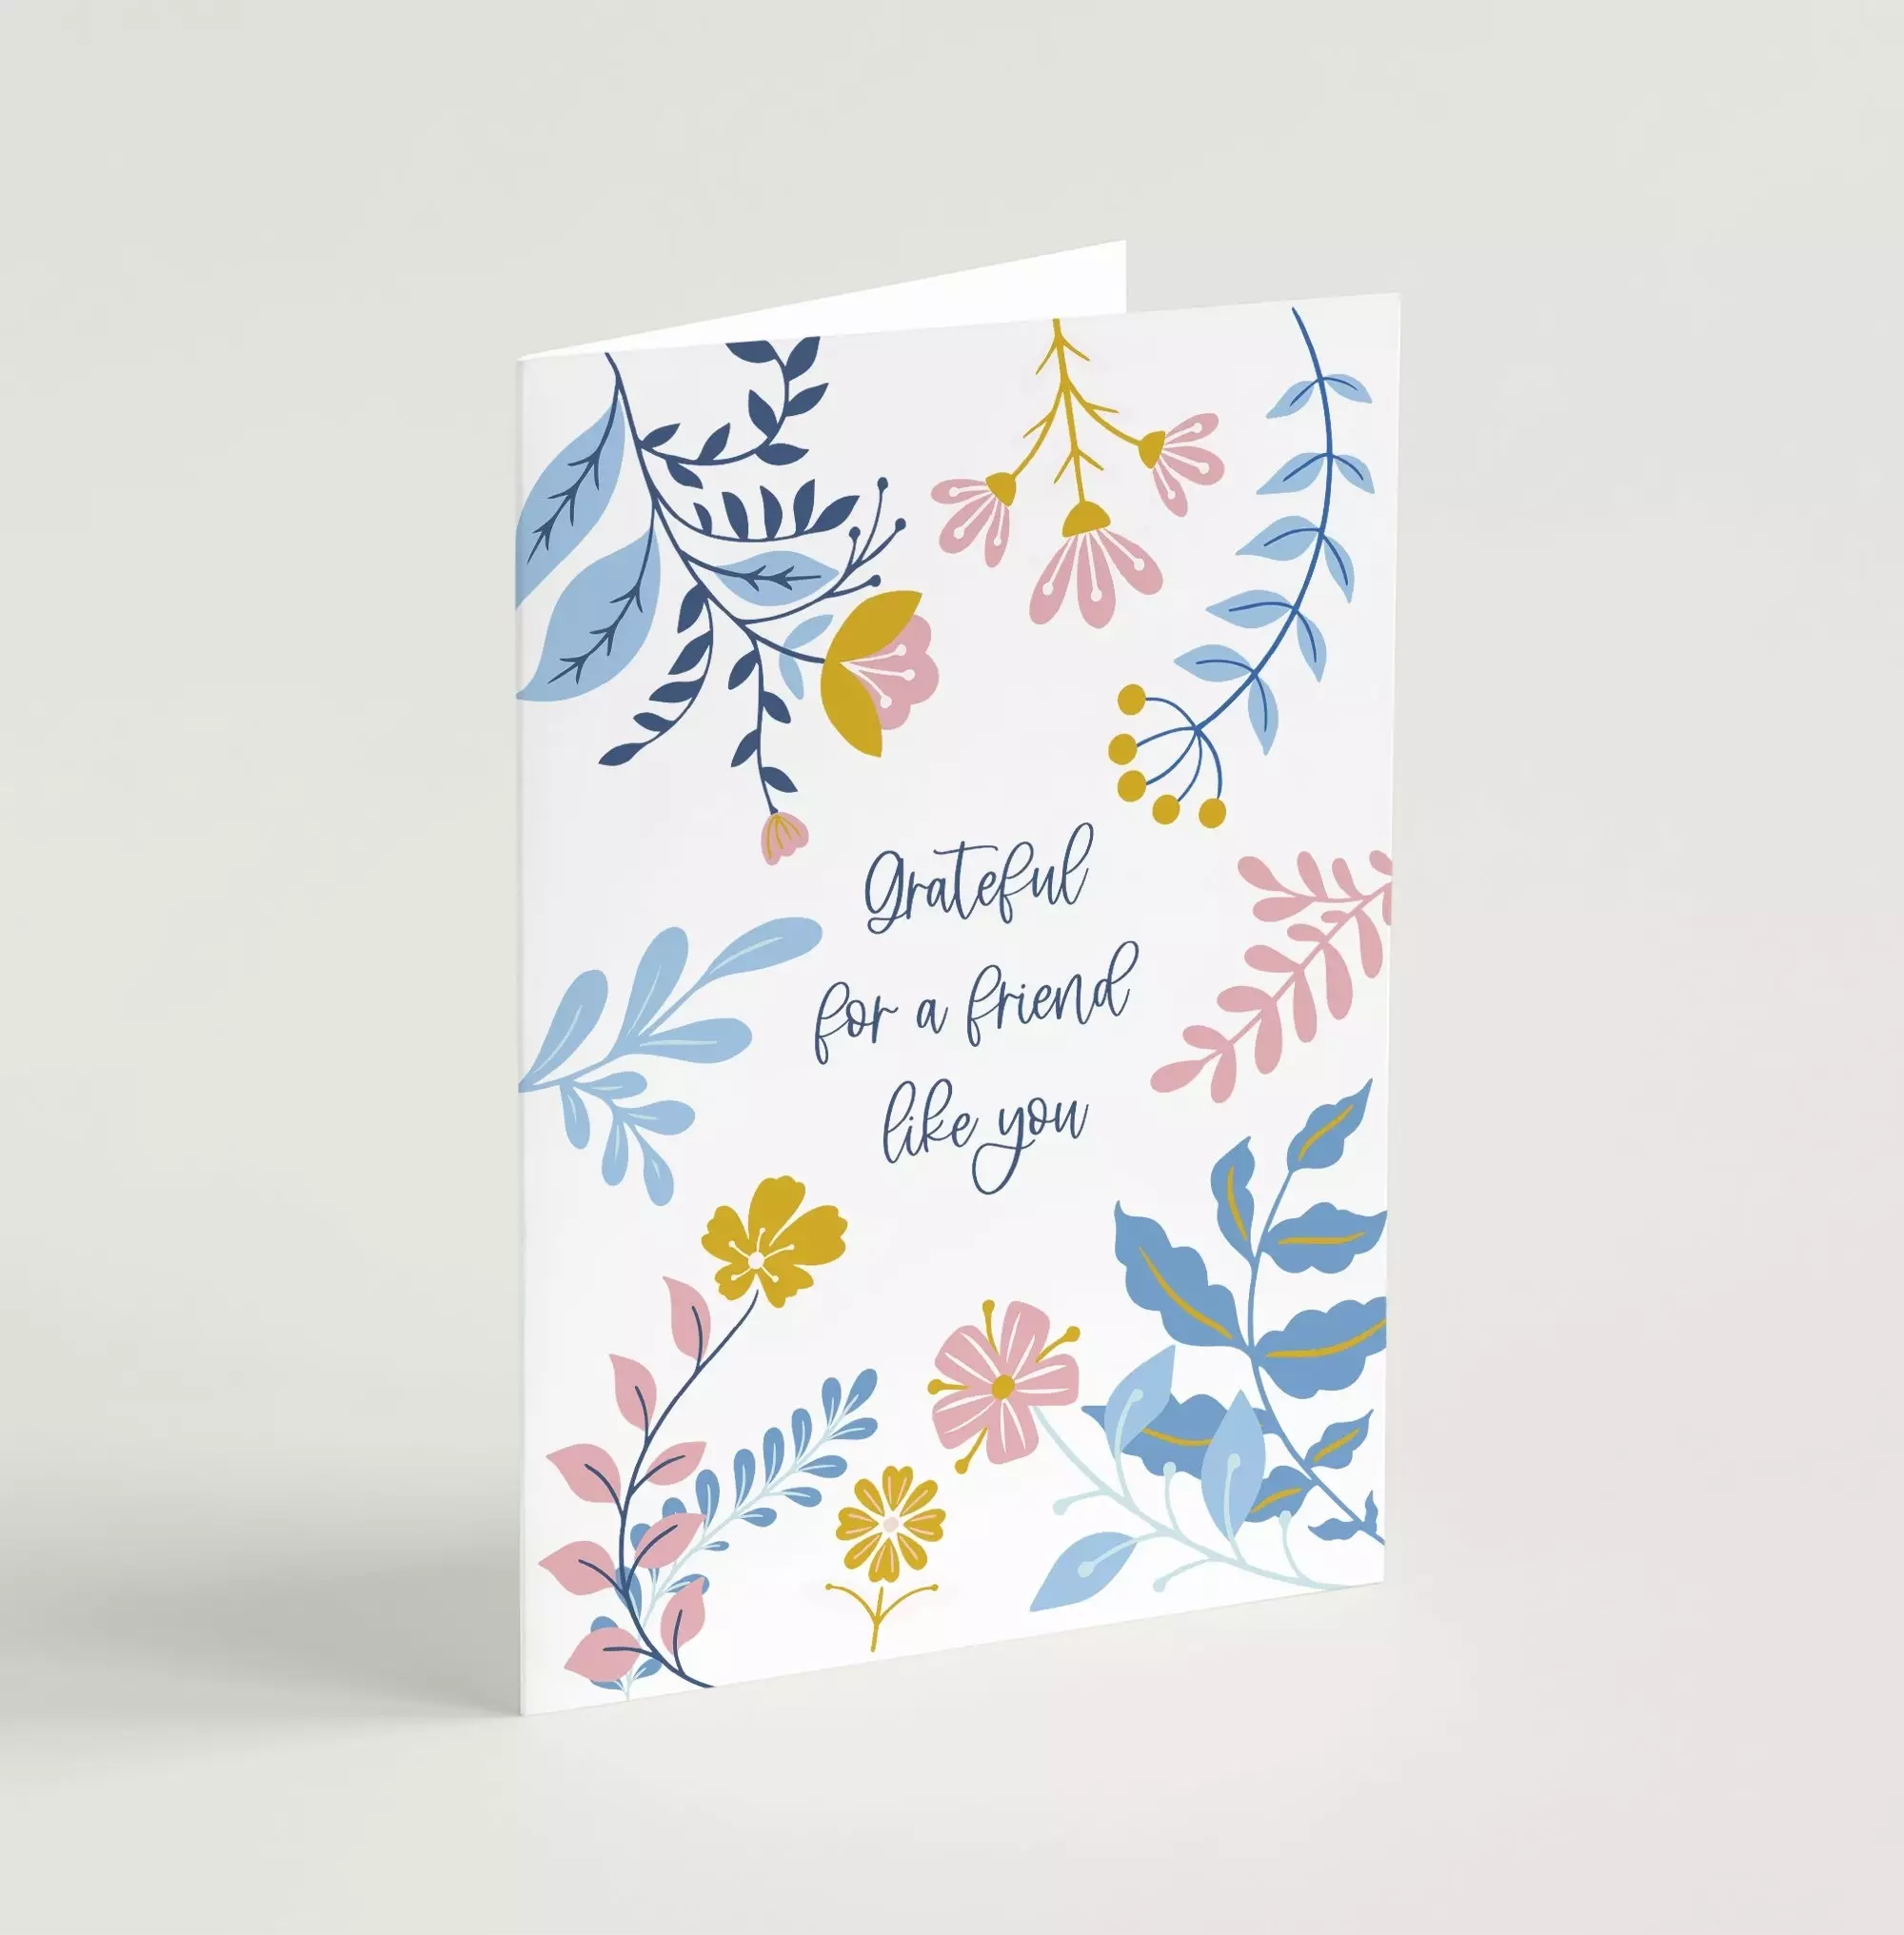 Grateful for a friend like you (Blooms) - Greeting Card